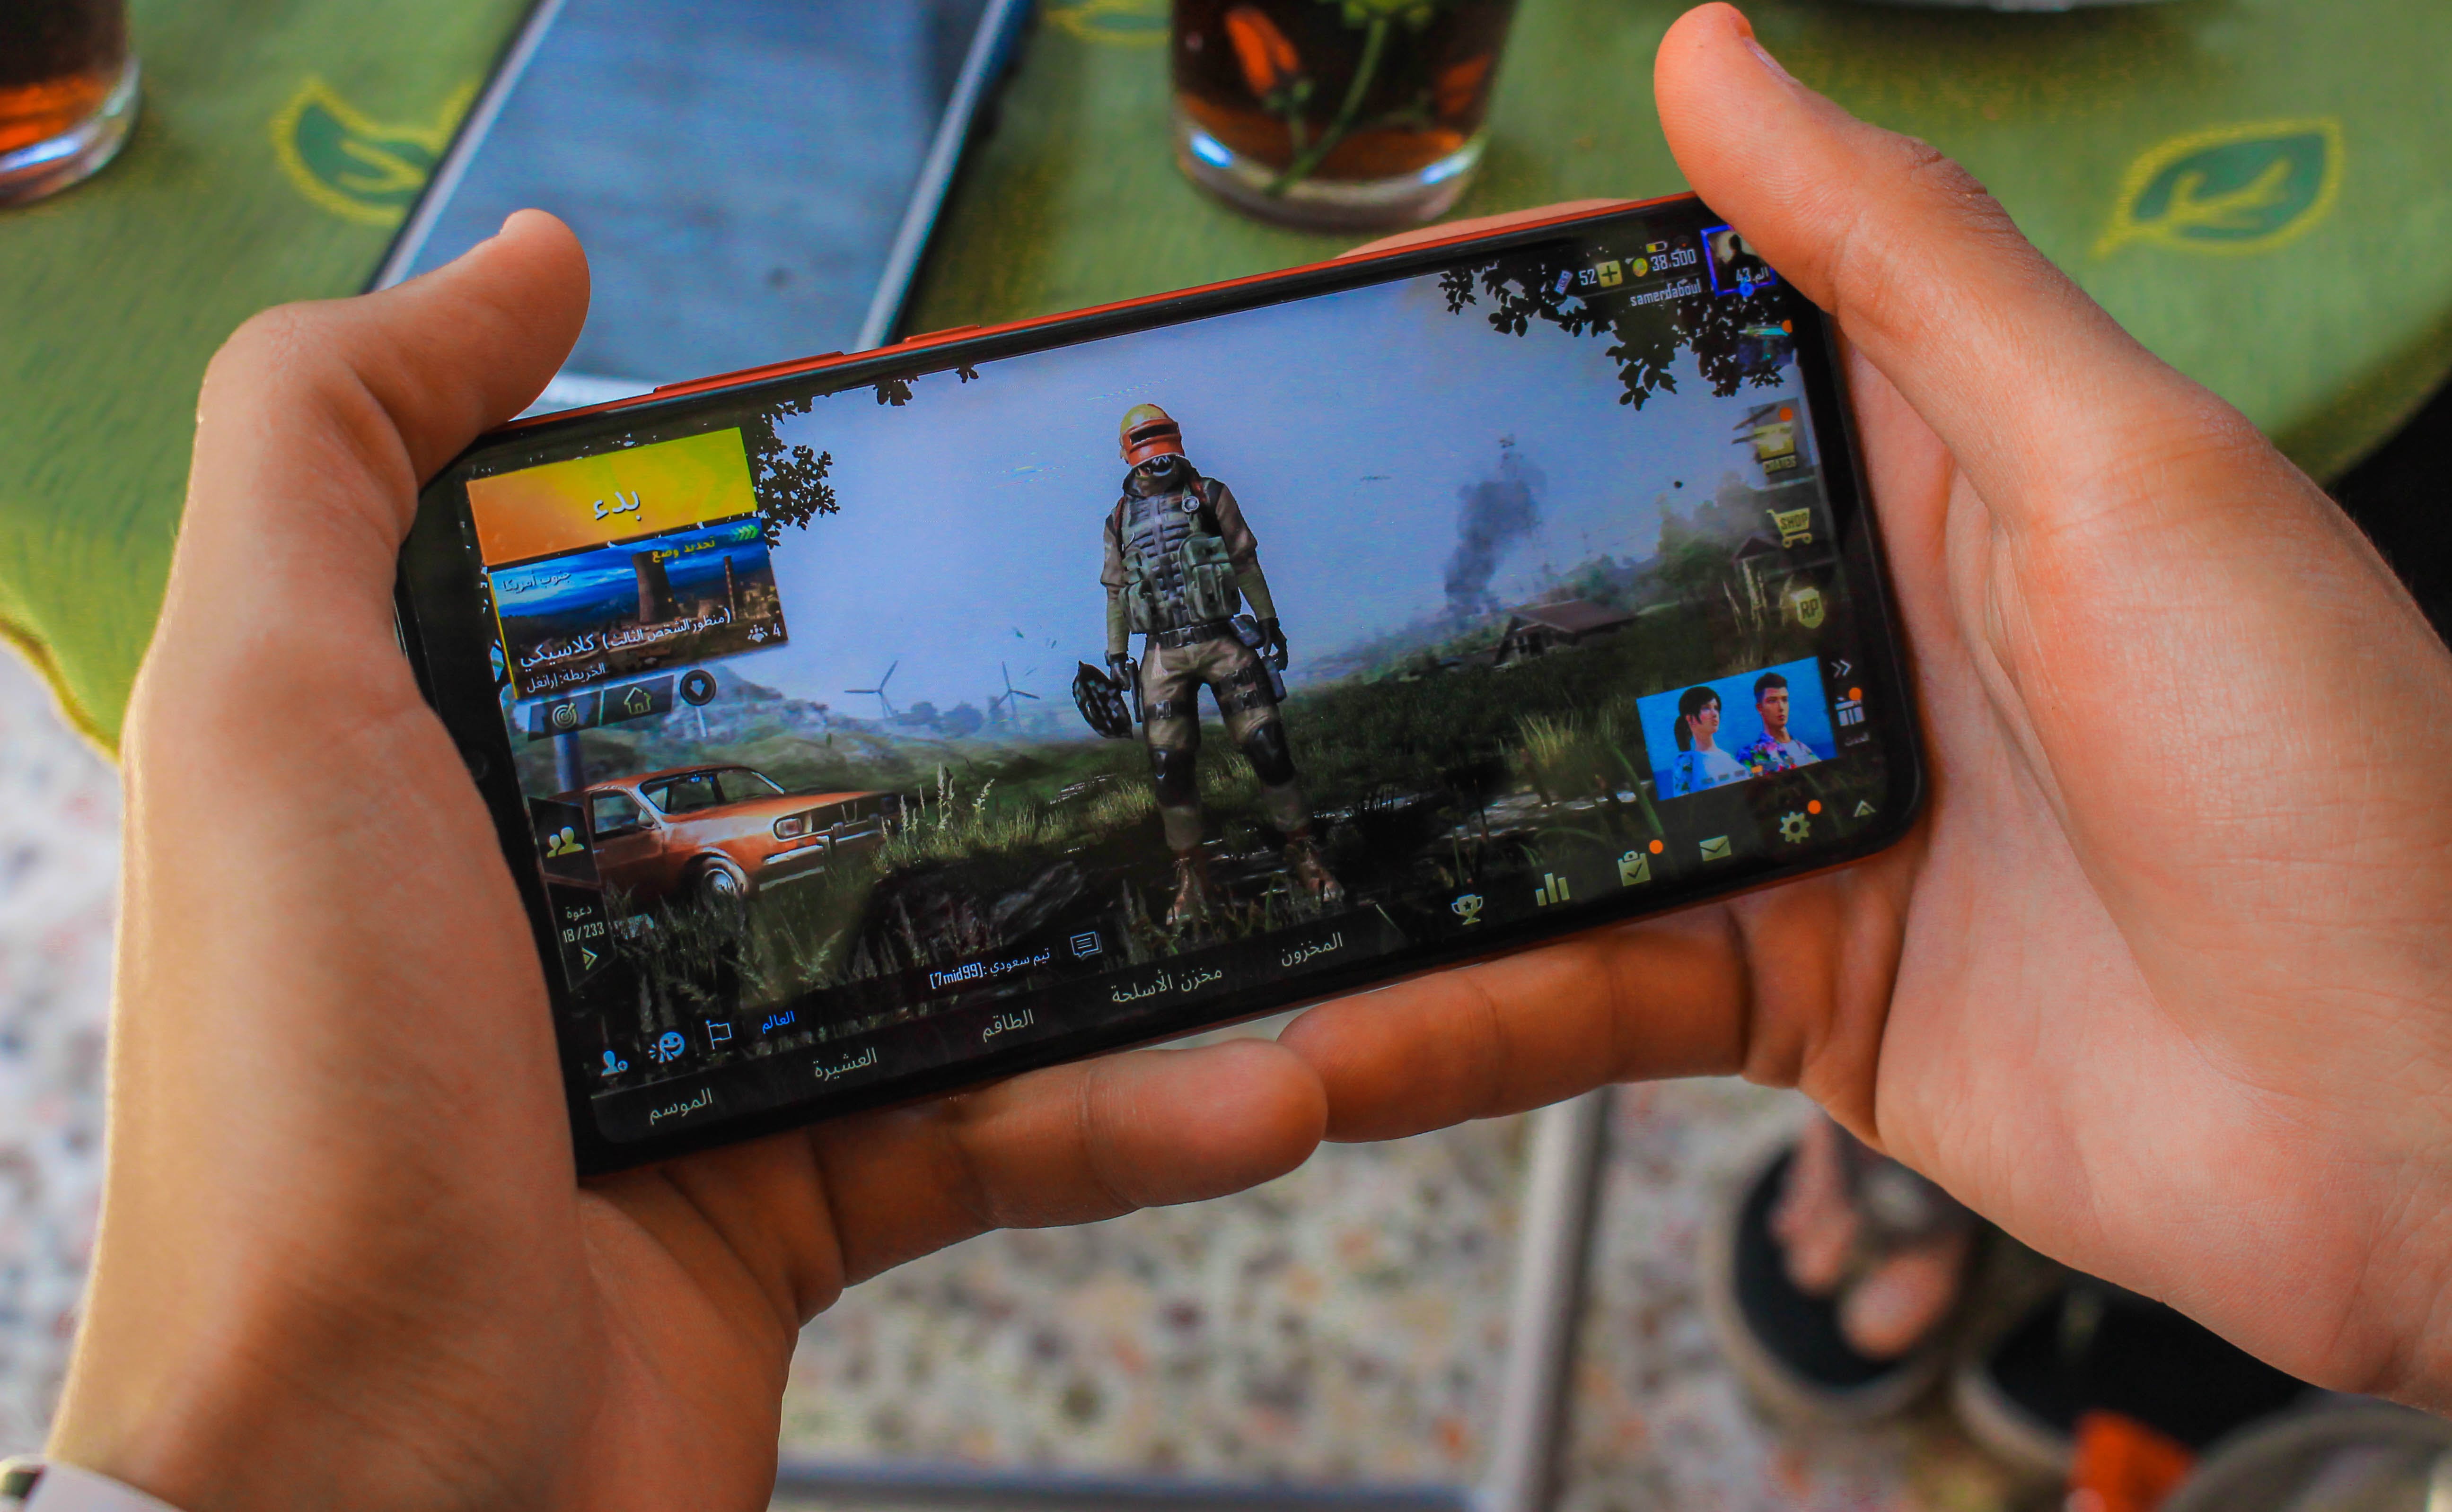 Why do we love playing online mobile games so much?